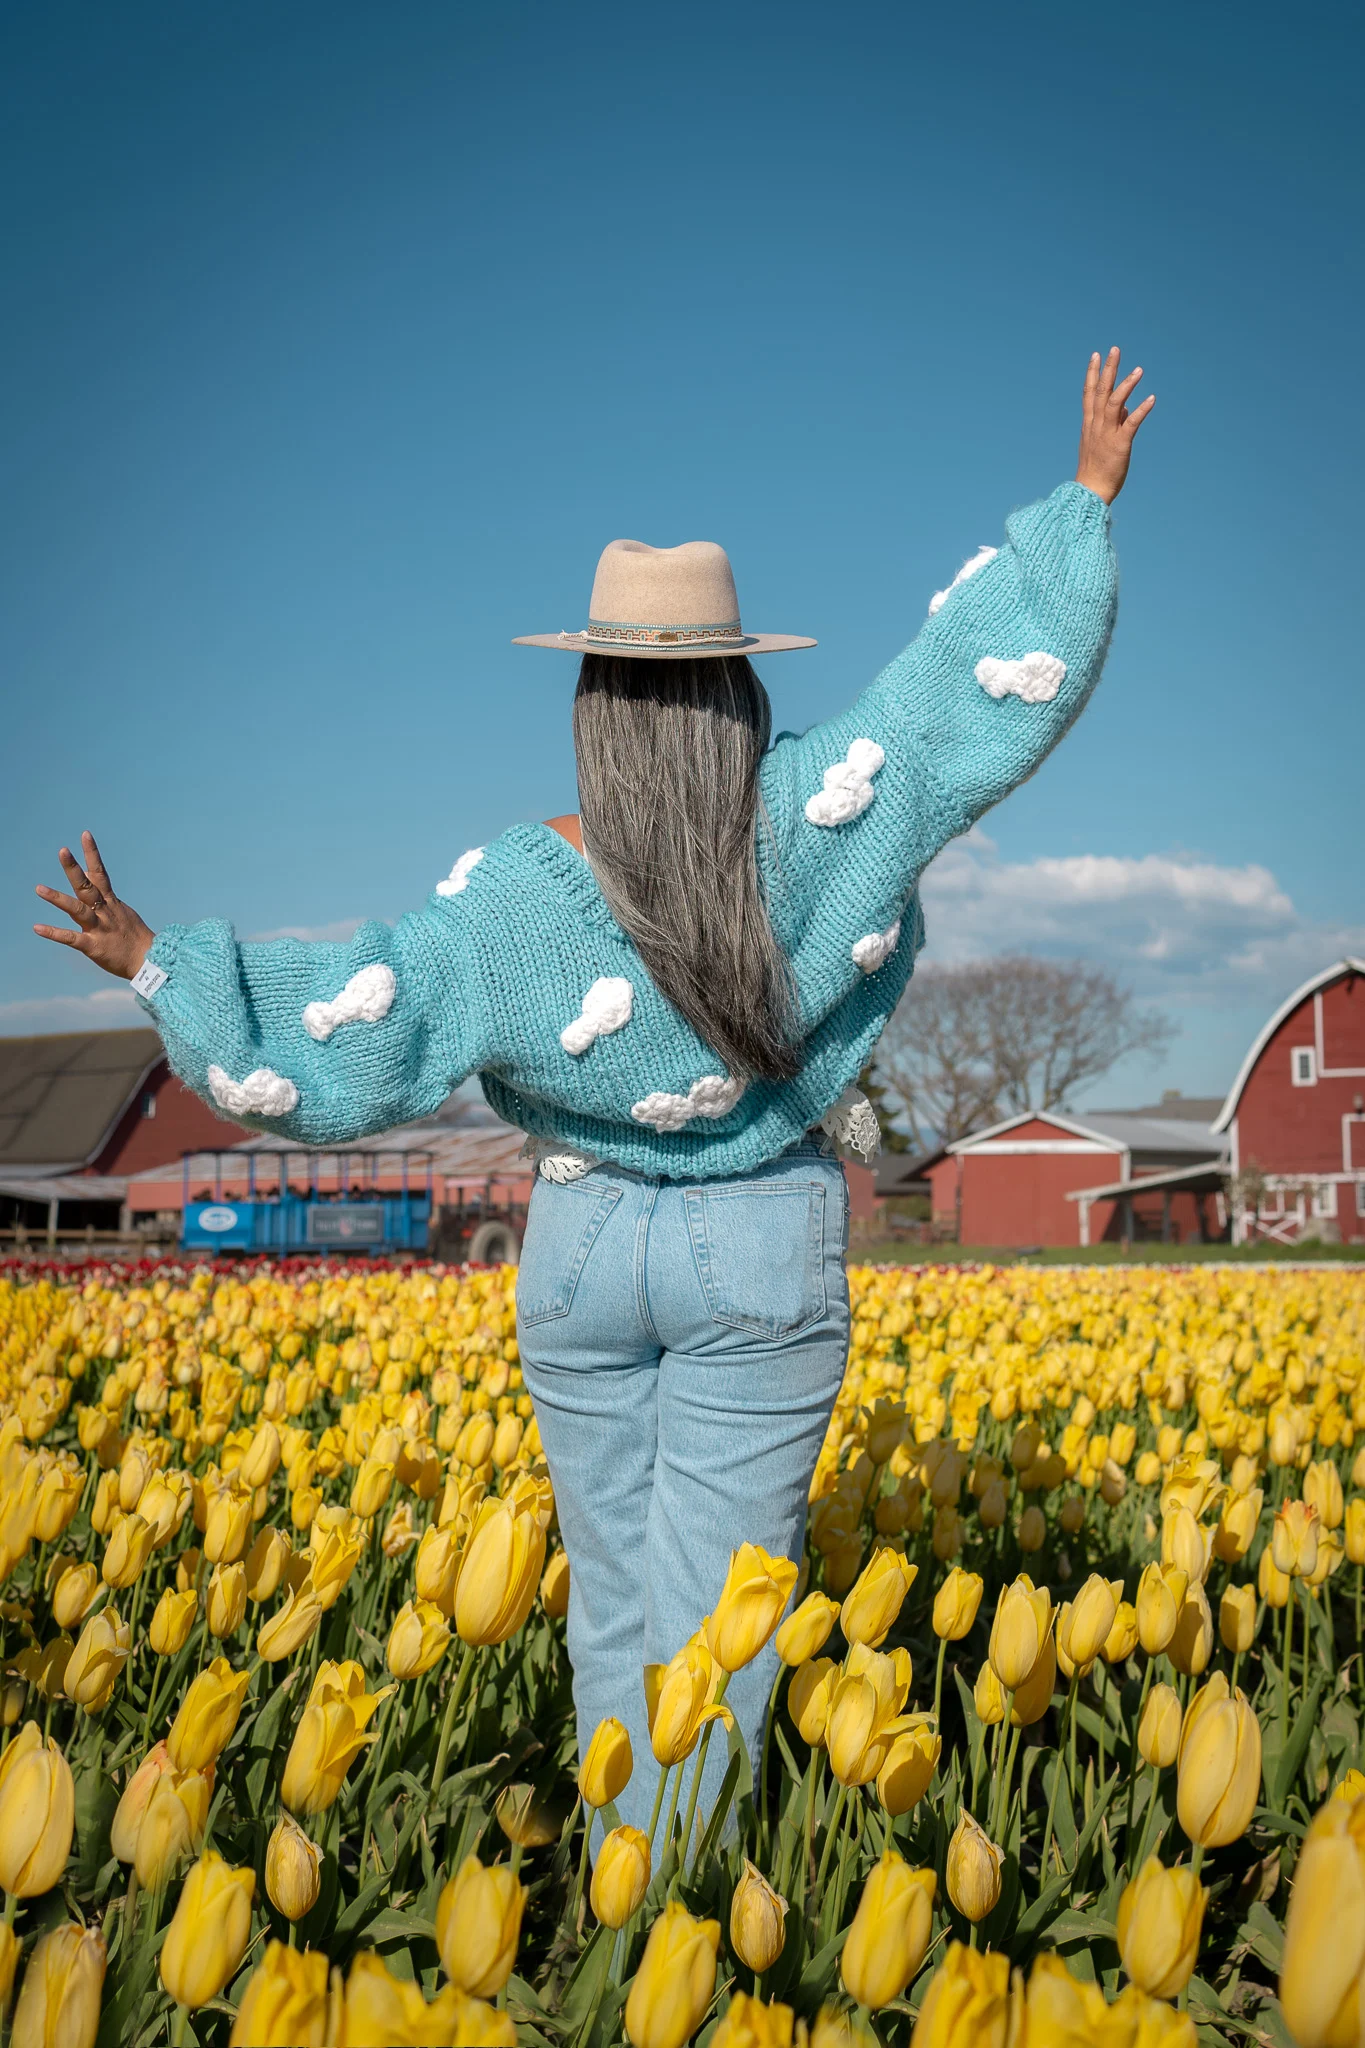 Tulip Town Skagit Valley Cloud Cardigan American Hat Makers Maldives hat Abercrombie jeans